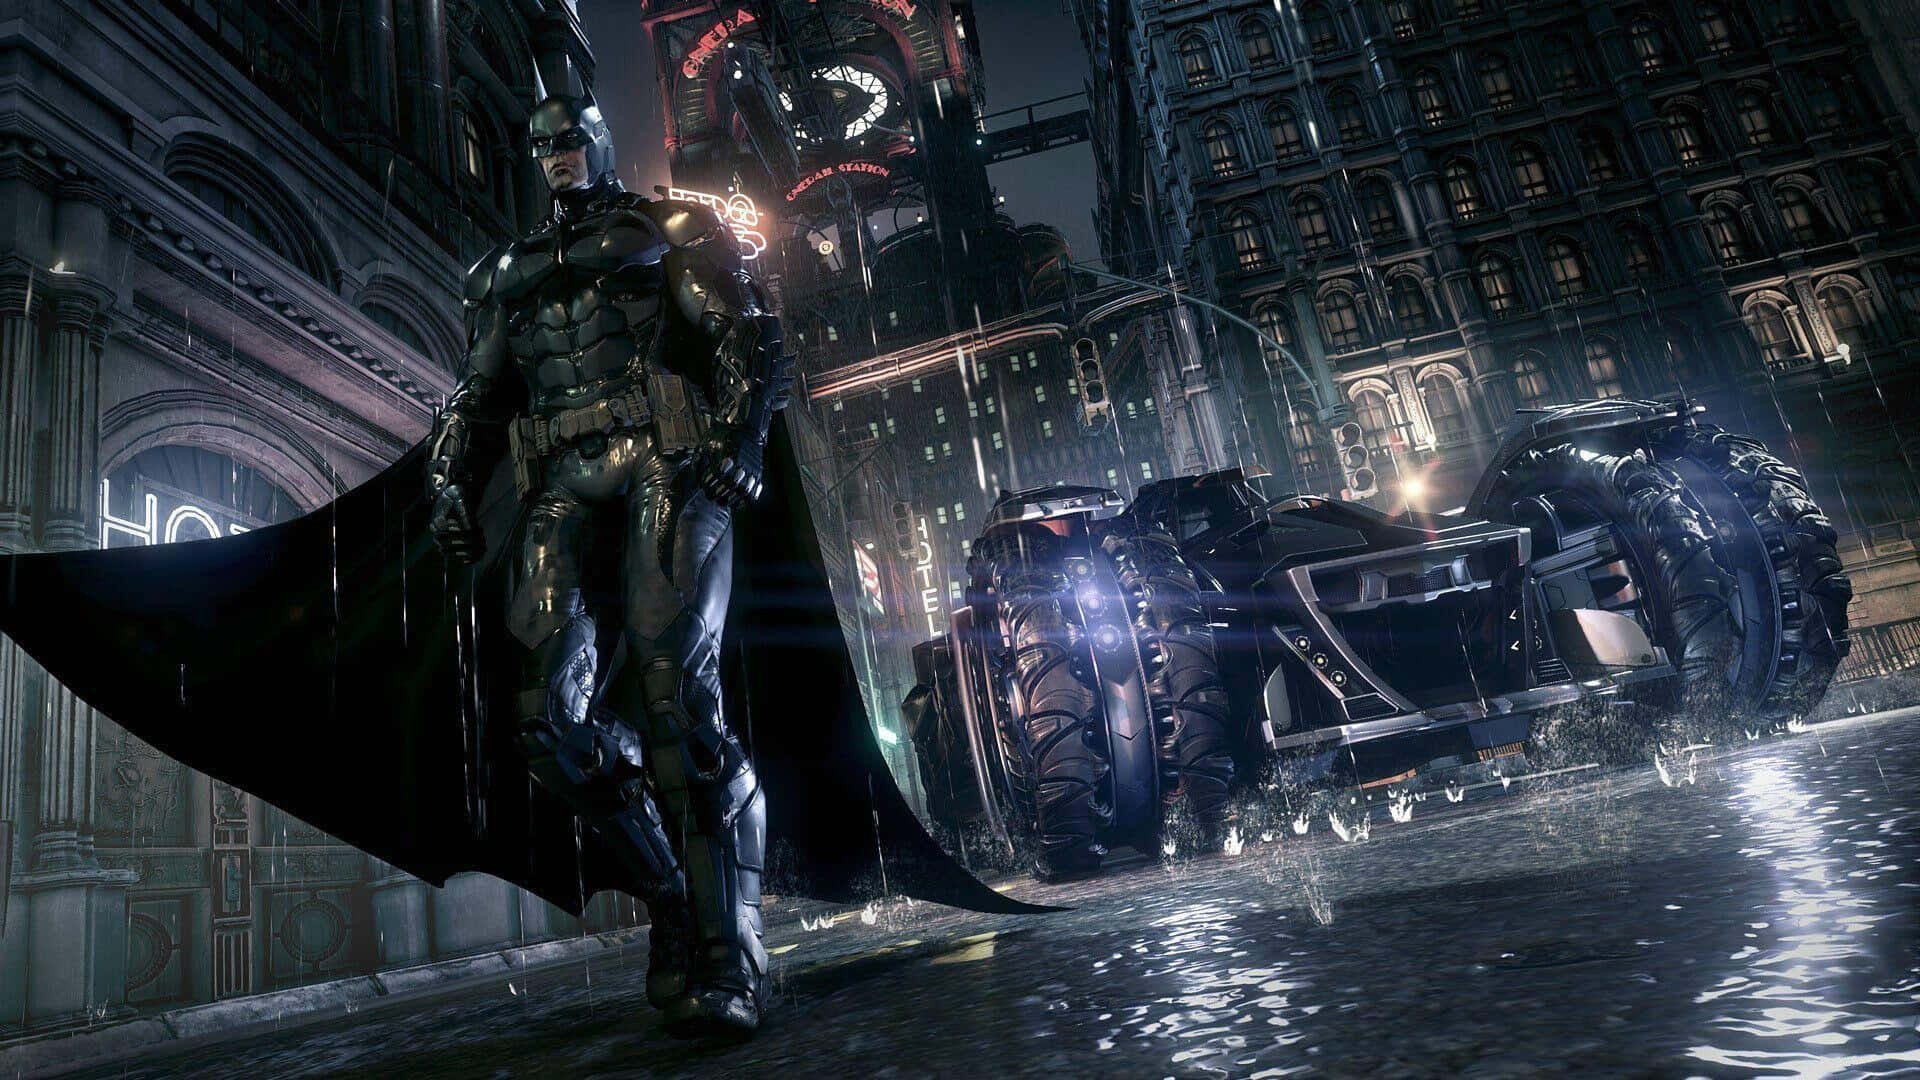 Step into the world of Batman with this HD wallpaper Wallpaper